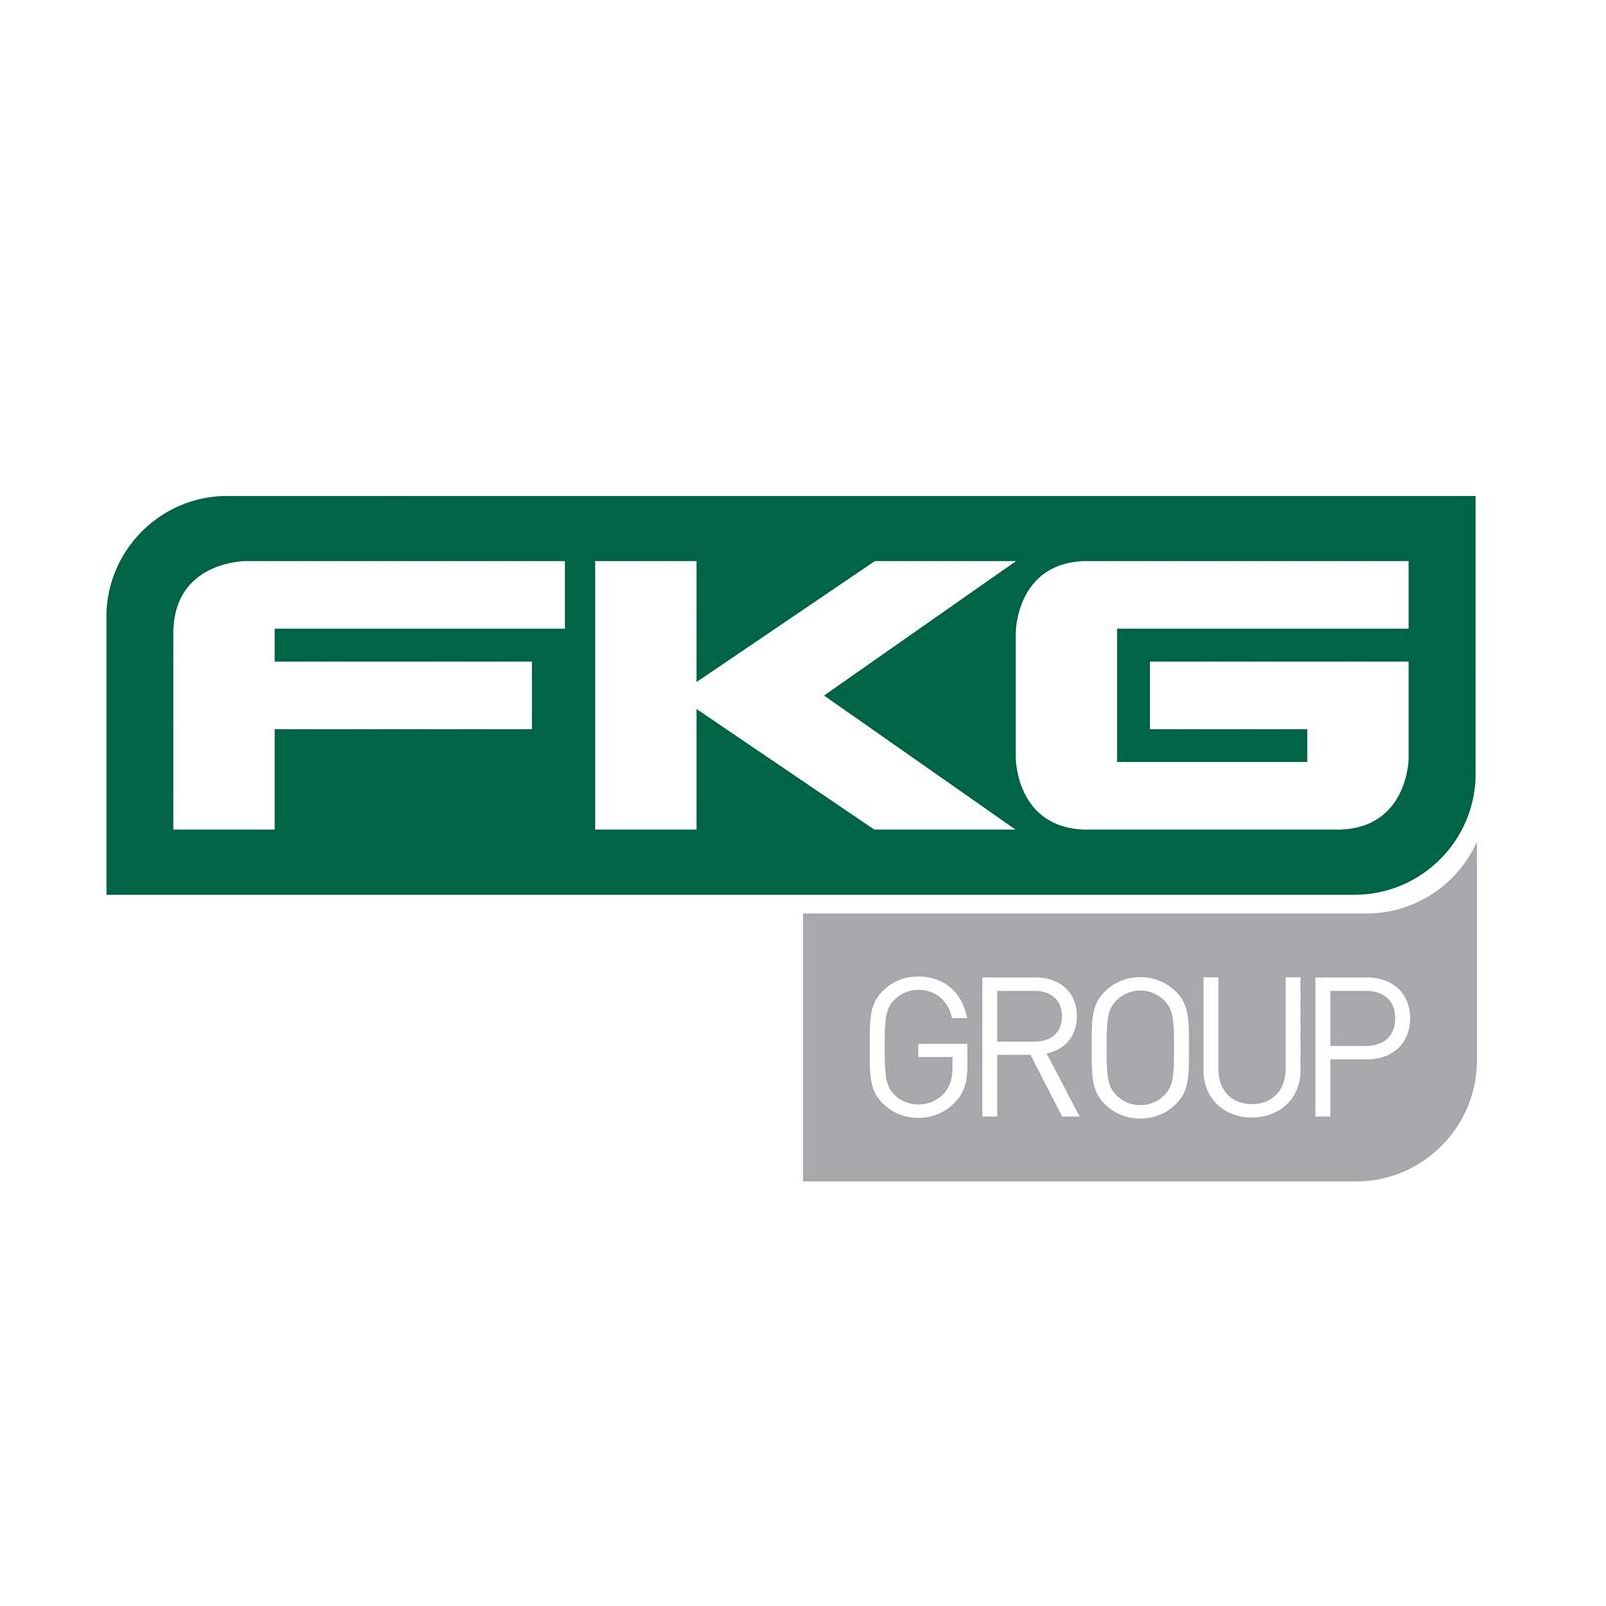 The FKG Group